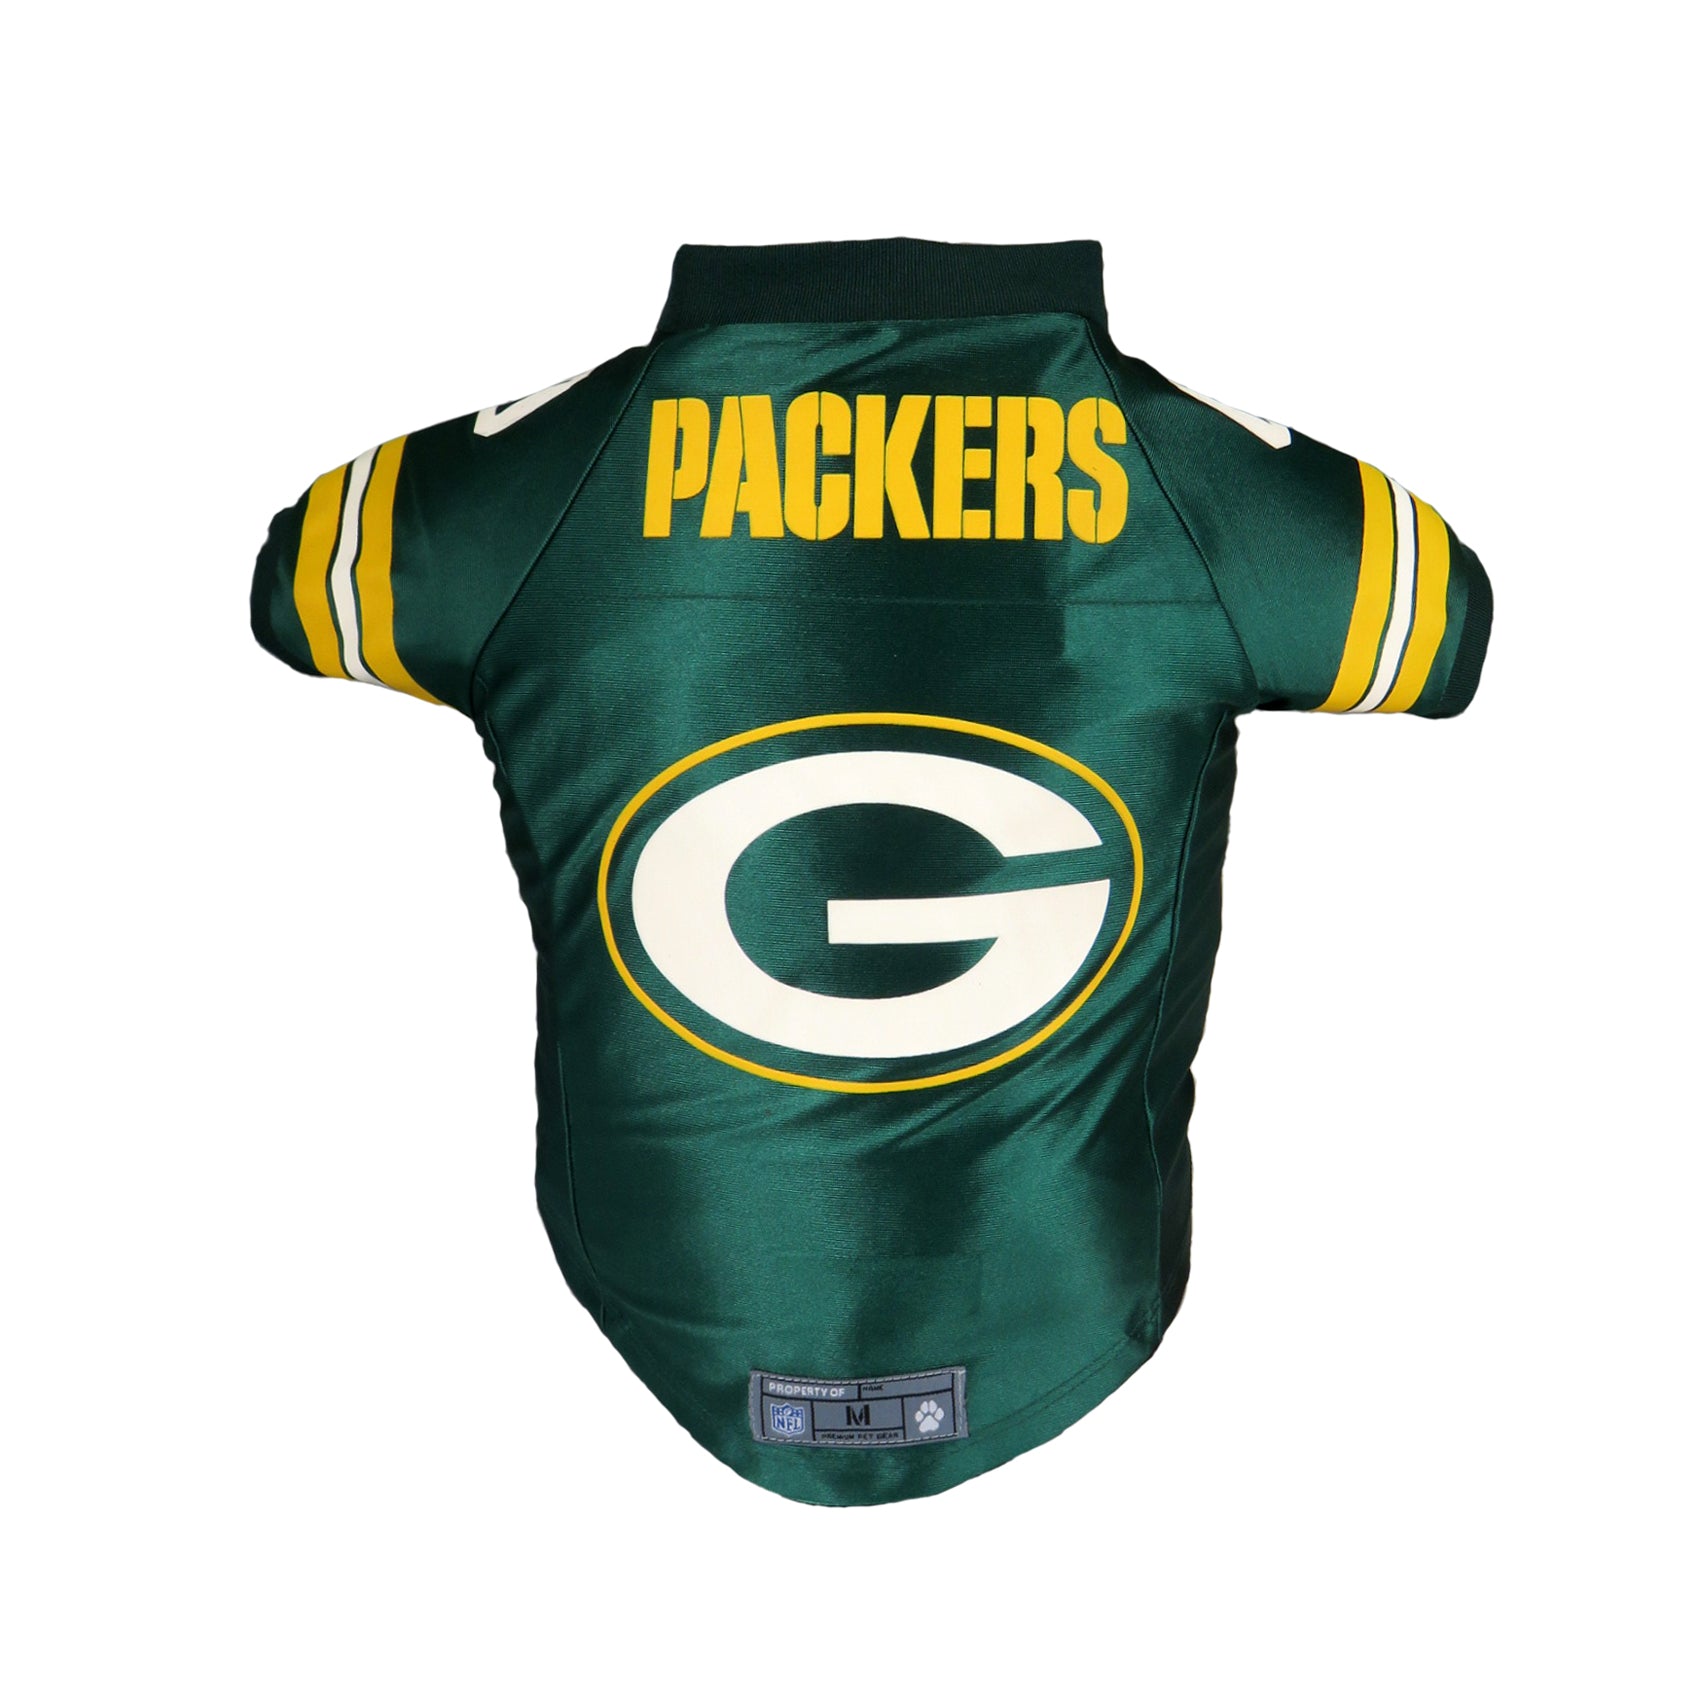 green bay packers football jersey